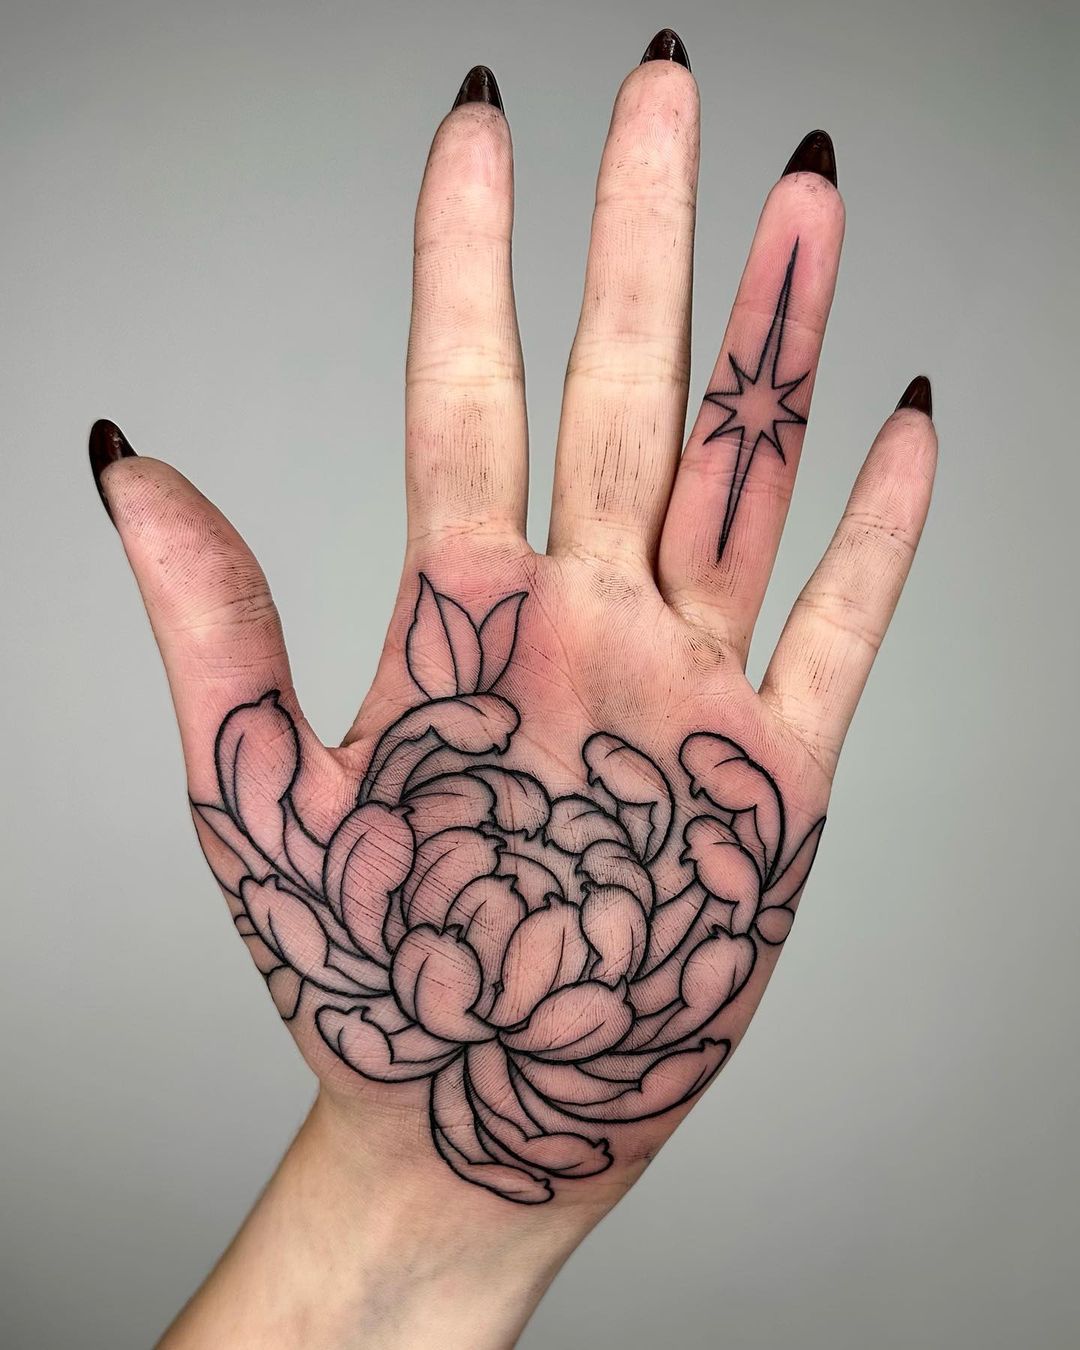 I never get tired of drawing spider mums : r/TattooArtists